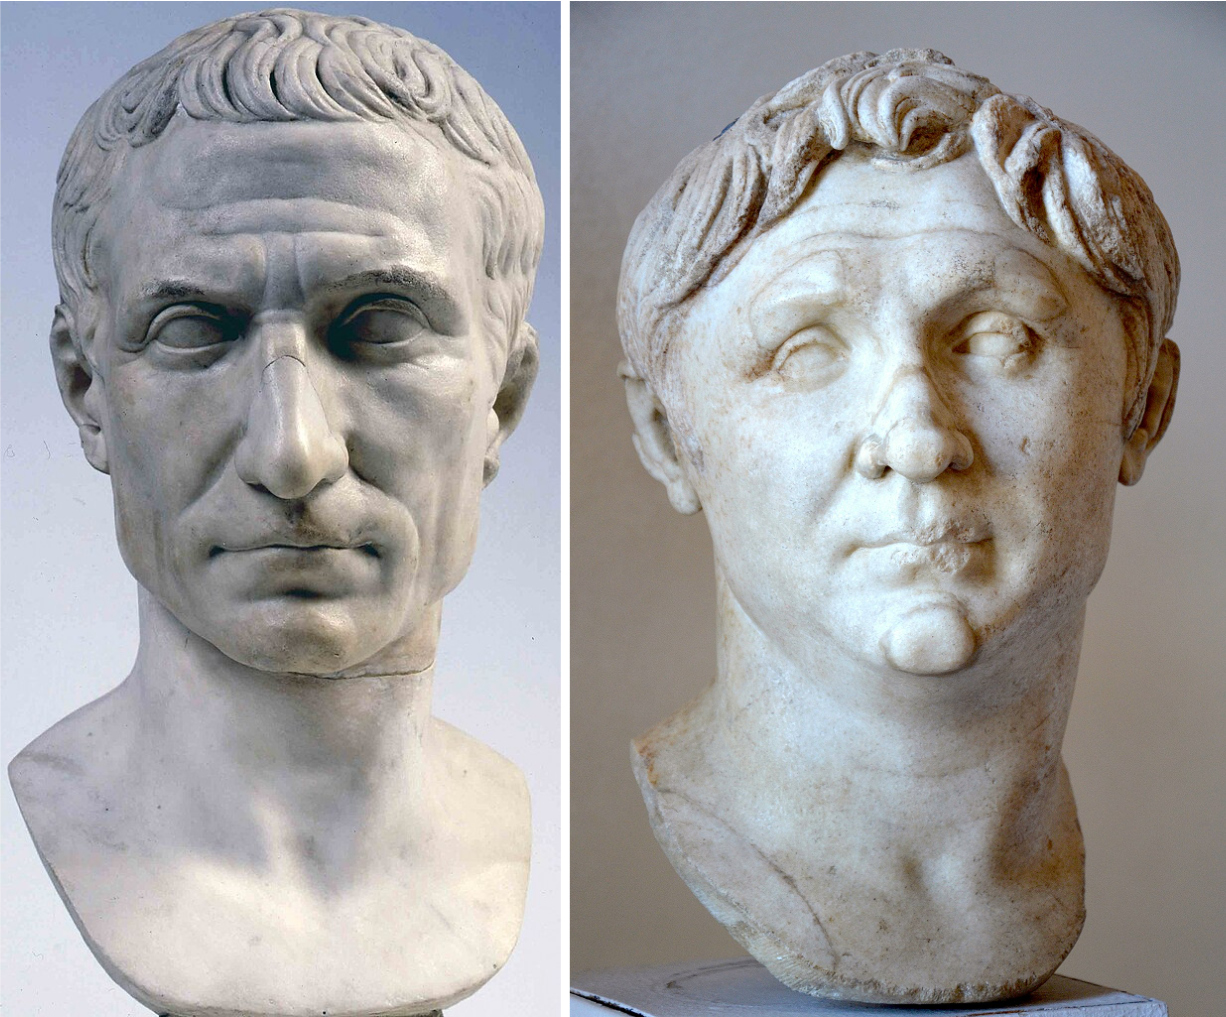 A bust of Julius Caesar from the early Julio-Claudian period (late 1st BCE–early 1st CE) (left). An Augustan copy of a bust of Pompey as a younger man (right).